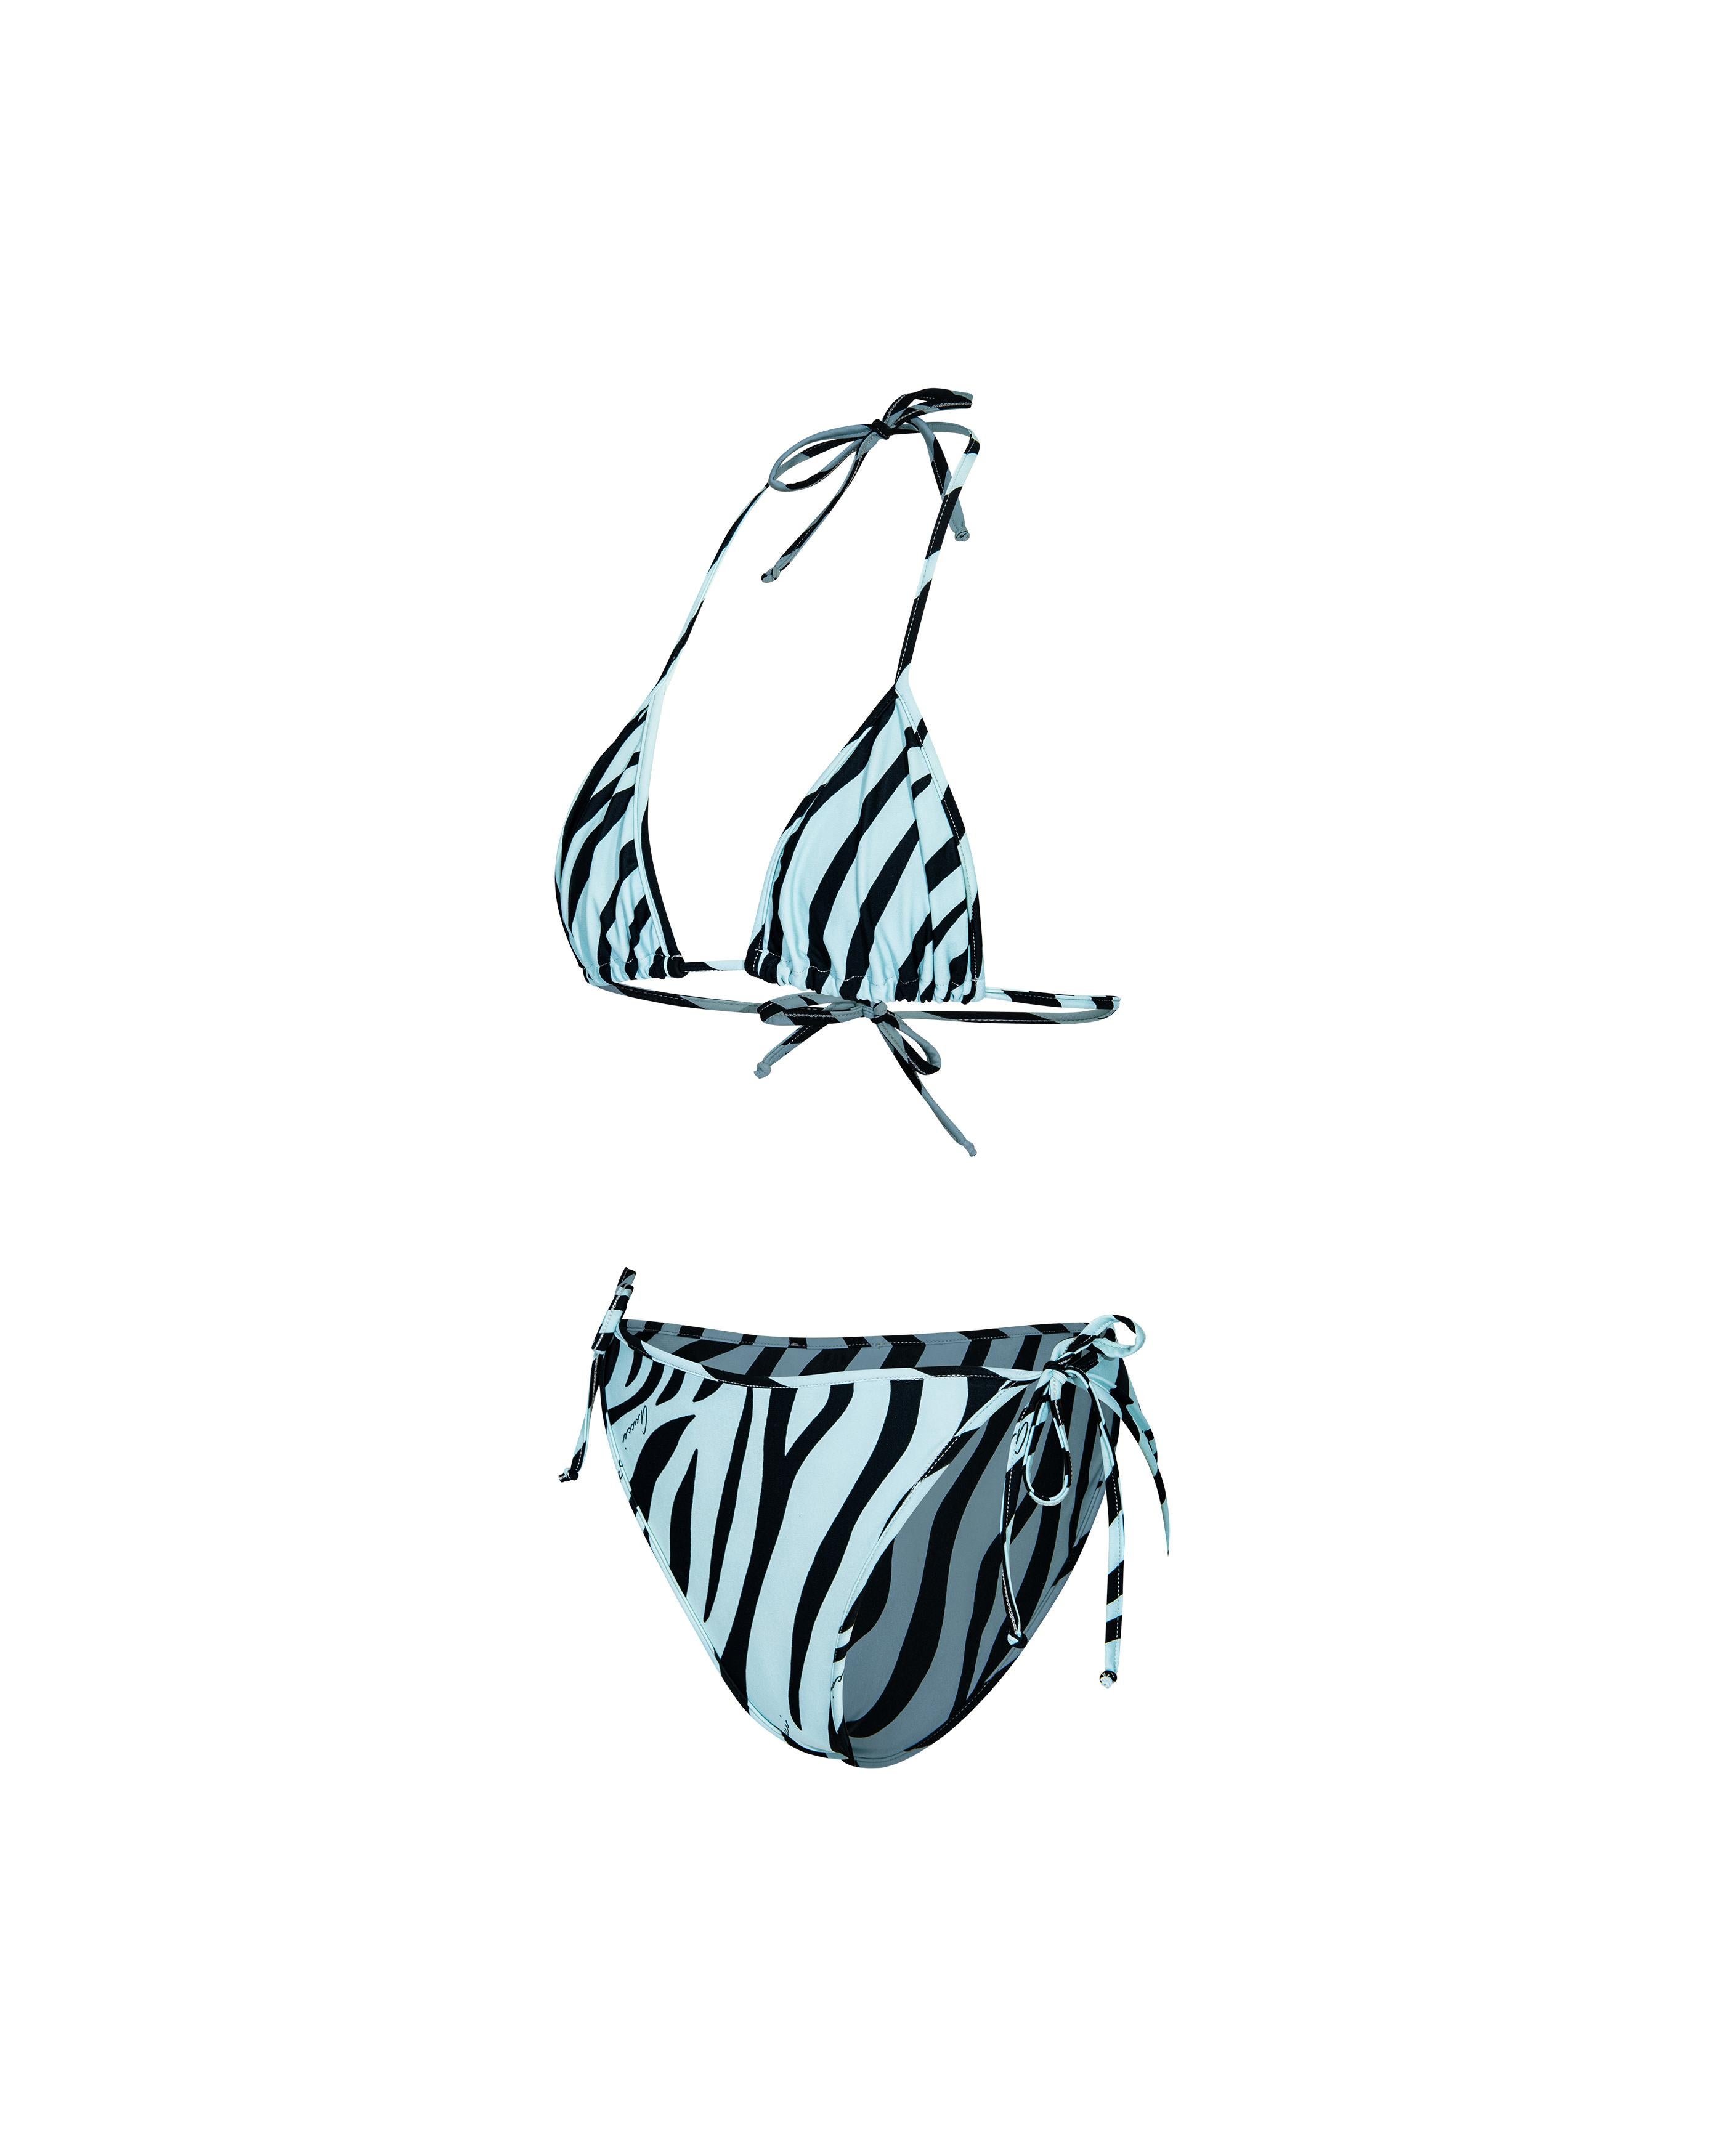 S/S 1996 Gucci by Tom Ford Blue and Black Zebra Print String Bikini In Excellent Condition In North Hollywood, CA